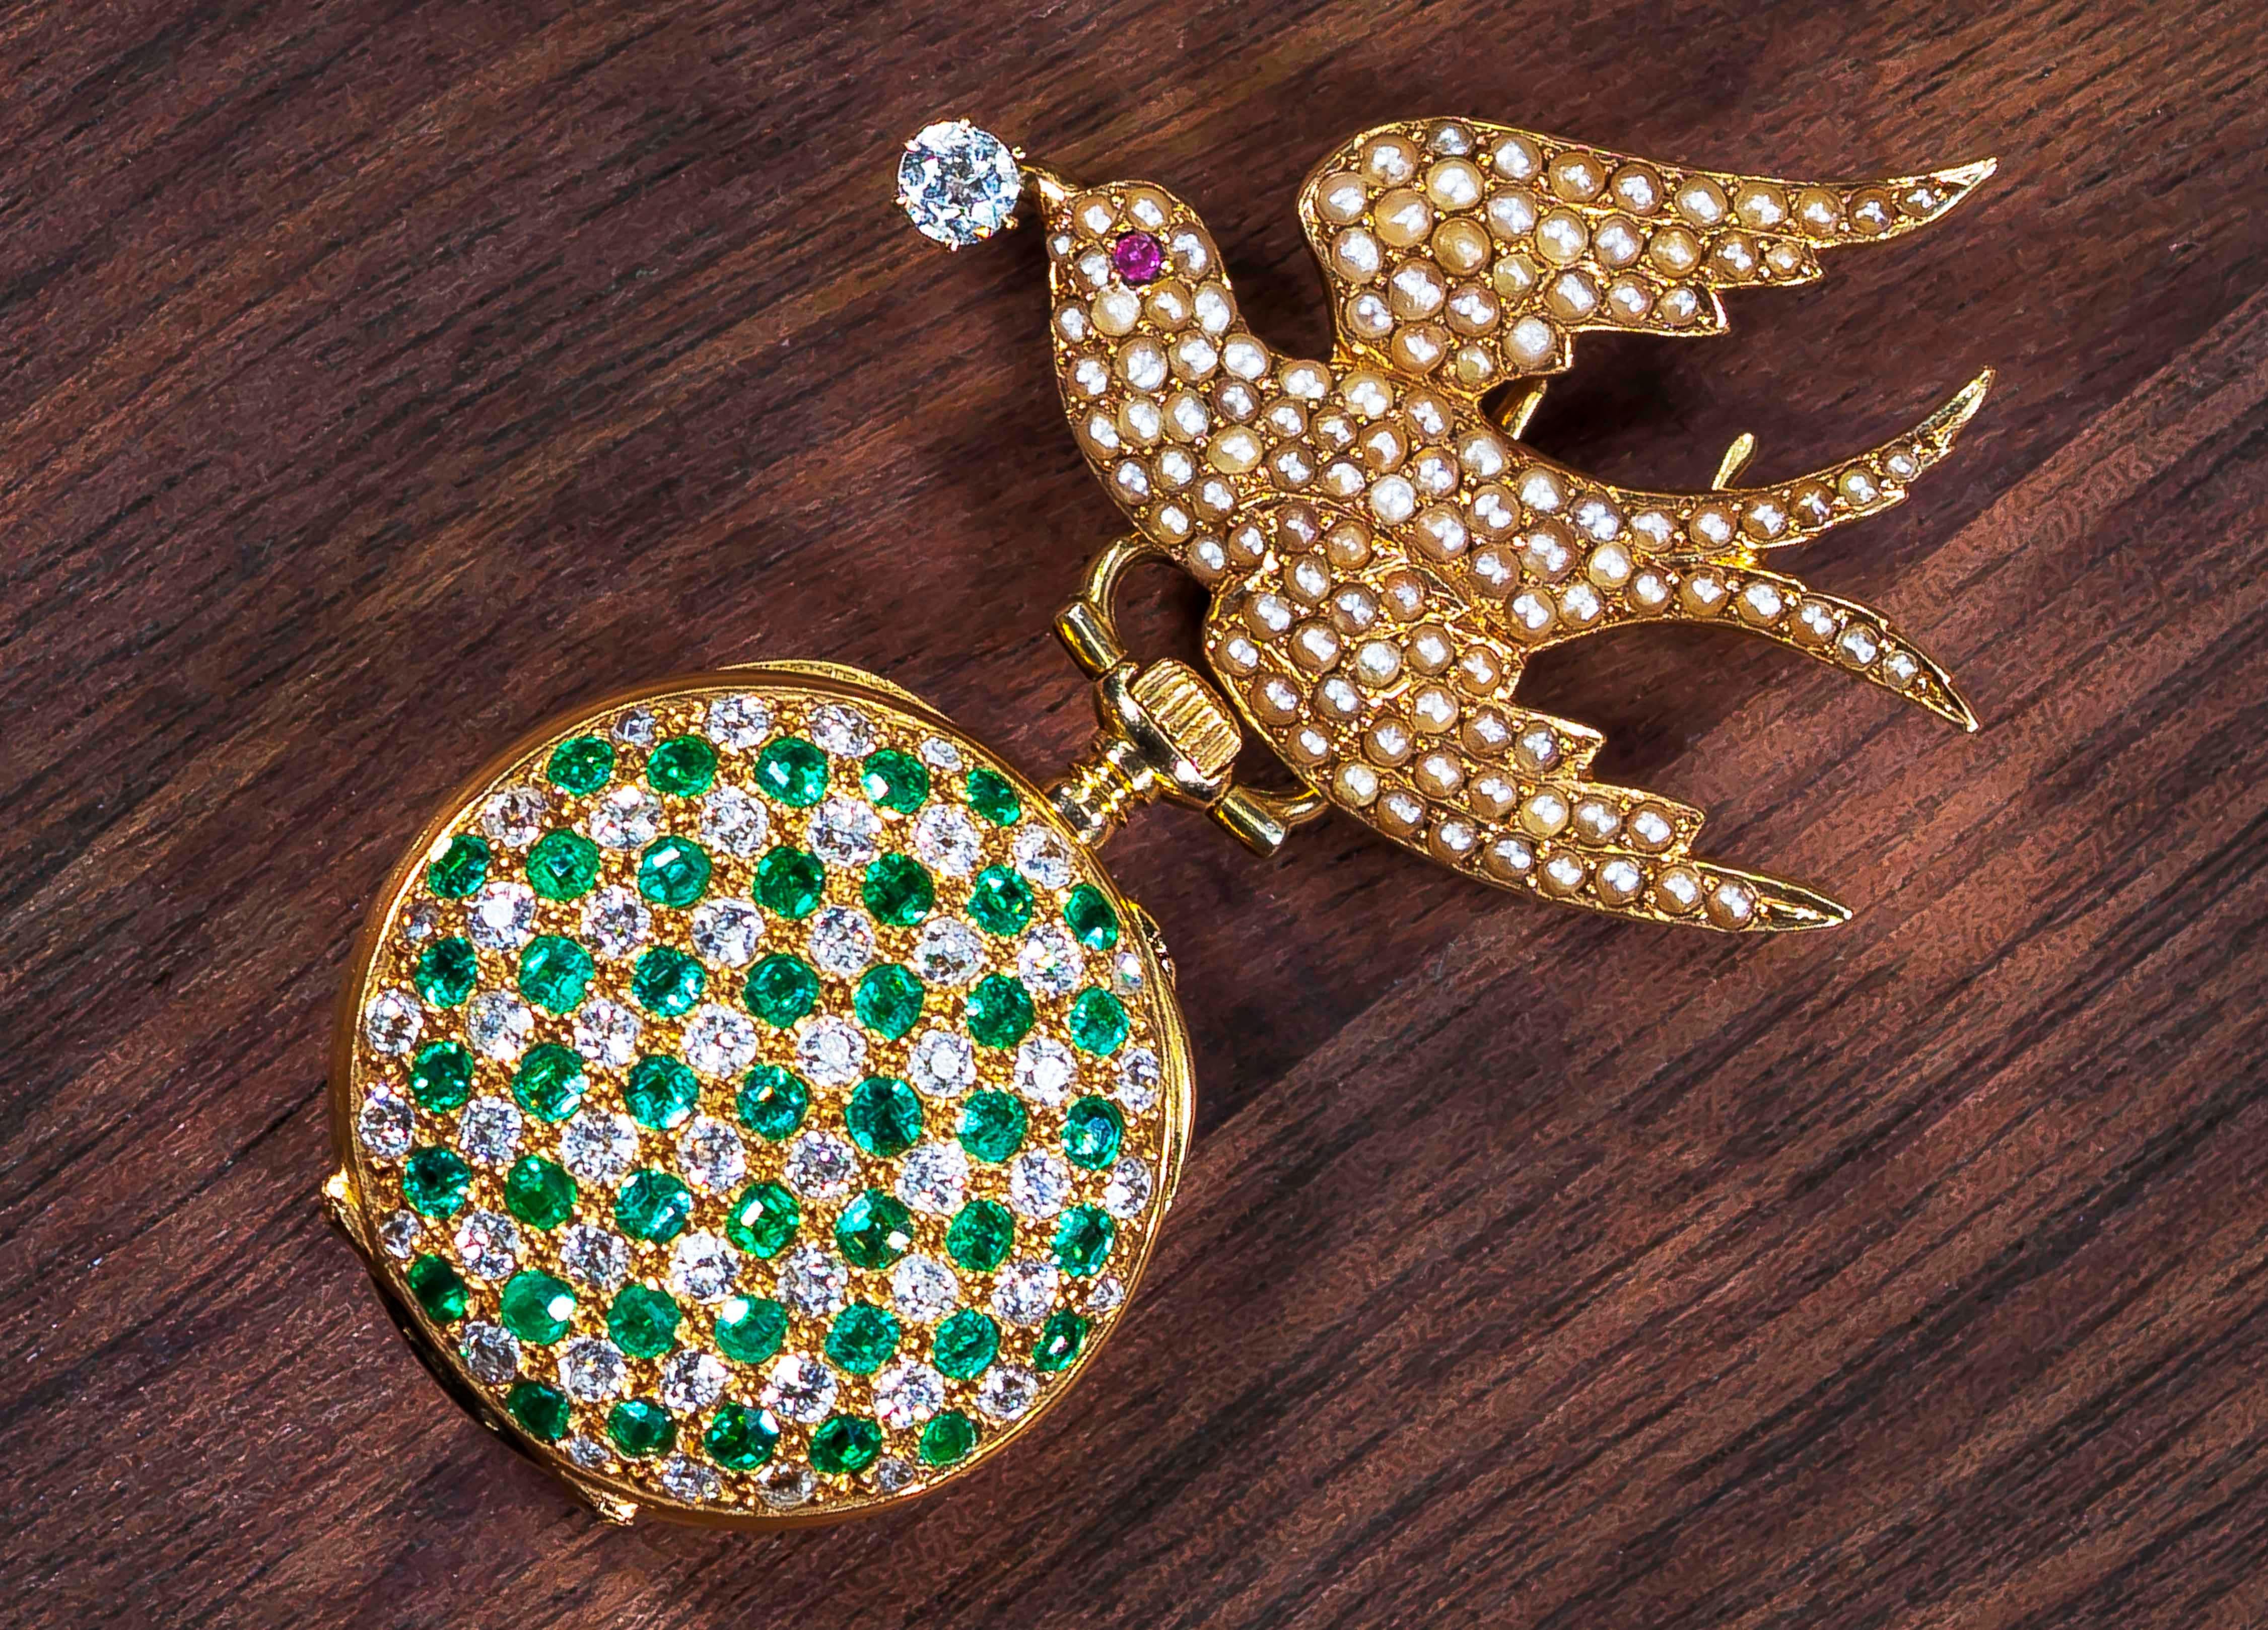 A Very Rare Signed Golay Fils & Stahl, Geneve, 18kt Yellow Gold, Pearl Set, Rose Cut Diamond, Ruby & Emerald Set ‘Swallow’ Lapel & Pendant Watch, Circa 1840-1880

Basic Specs & Overview
*Pendant Drop Dimensions: 75mm x 45mm 
(top of bird to bottom